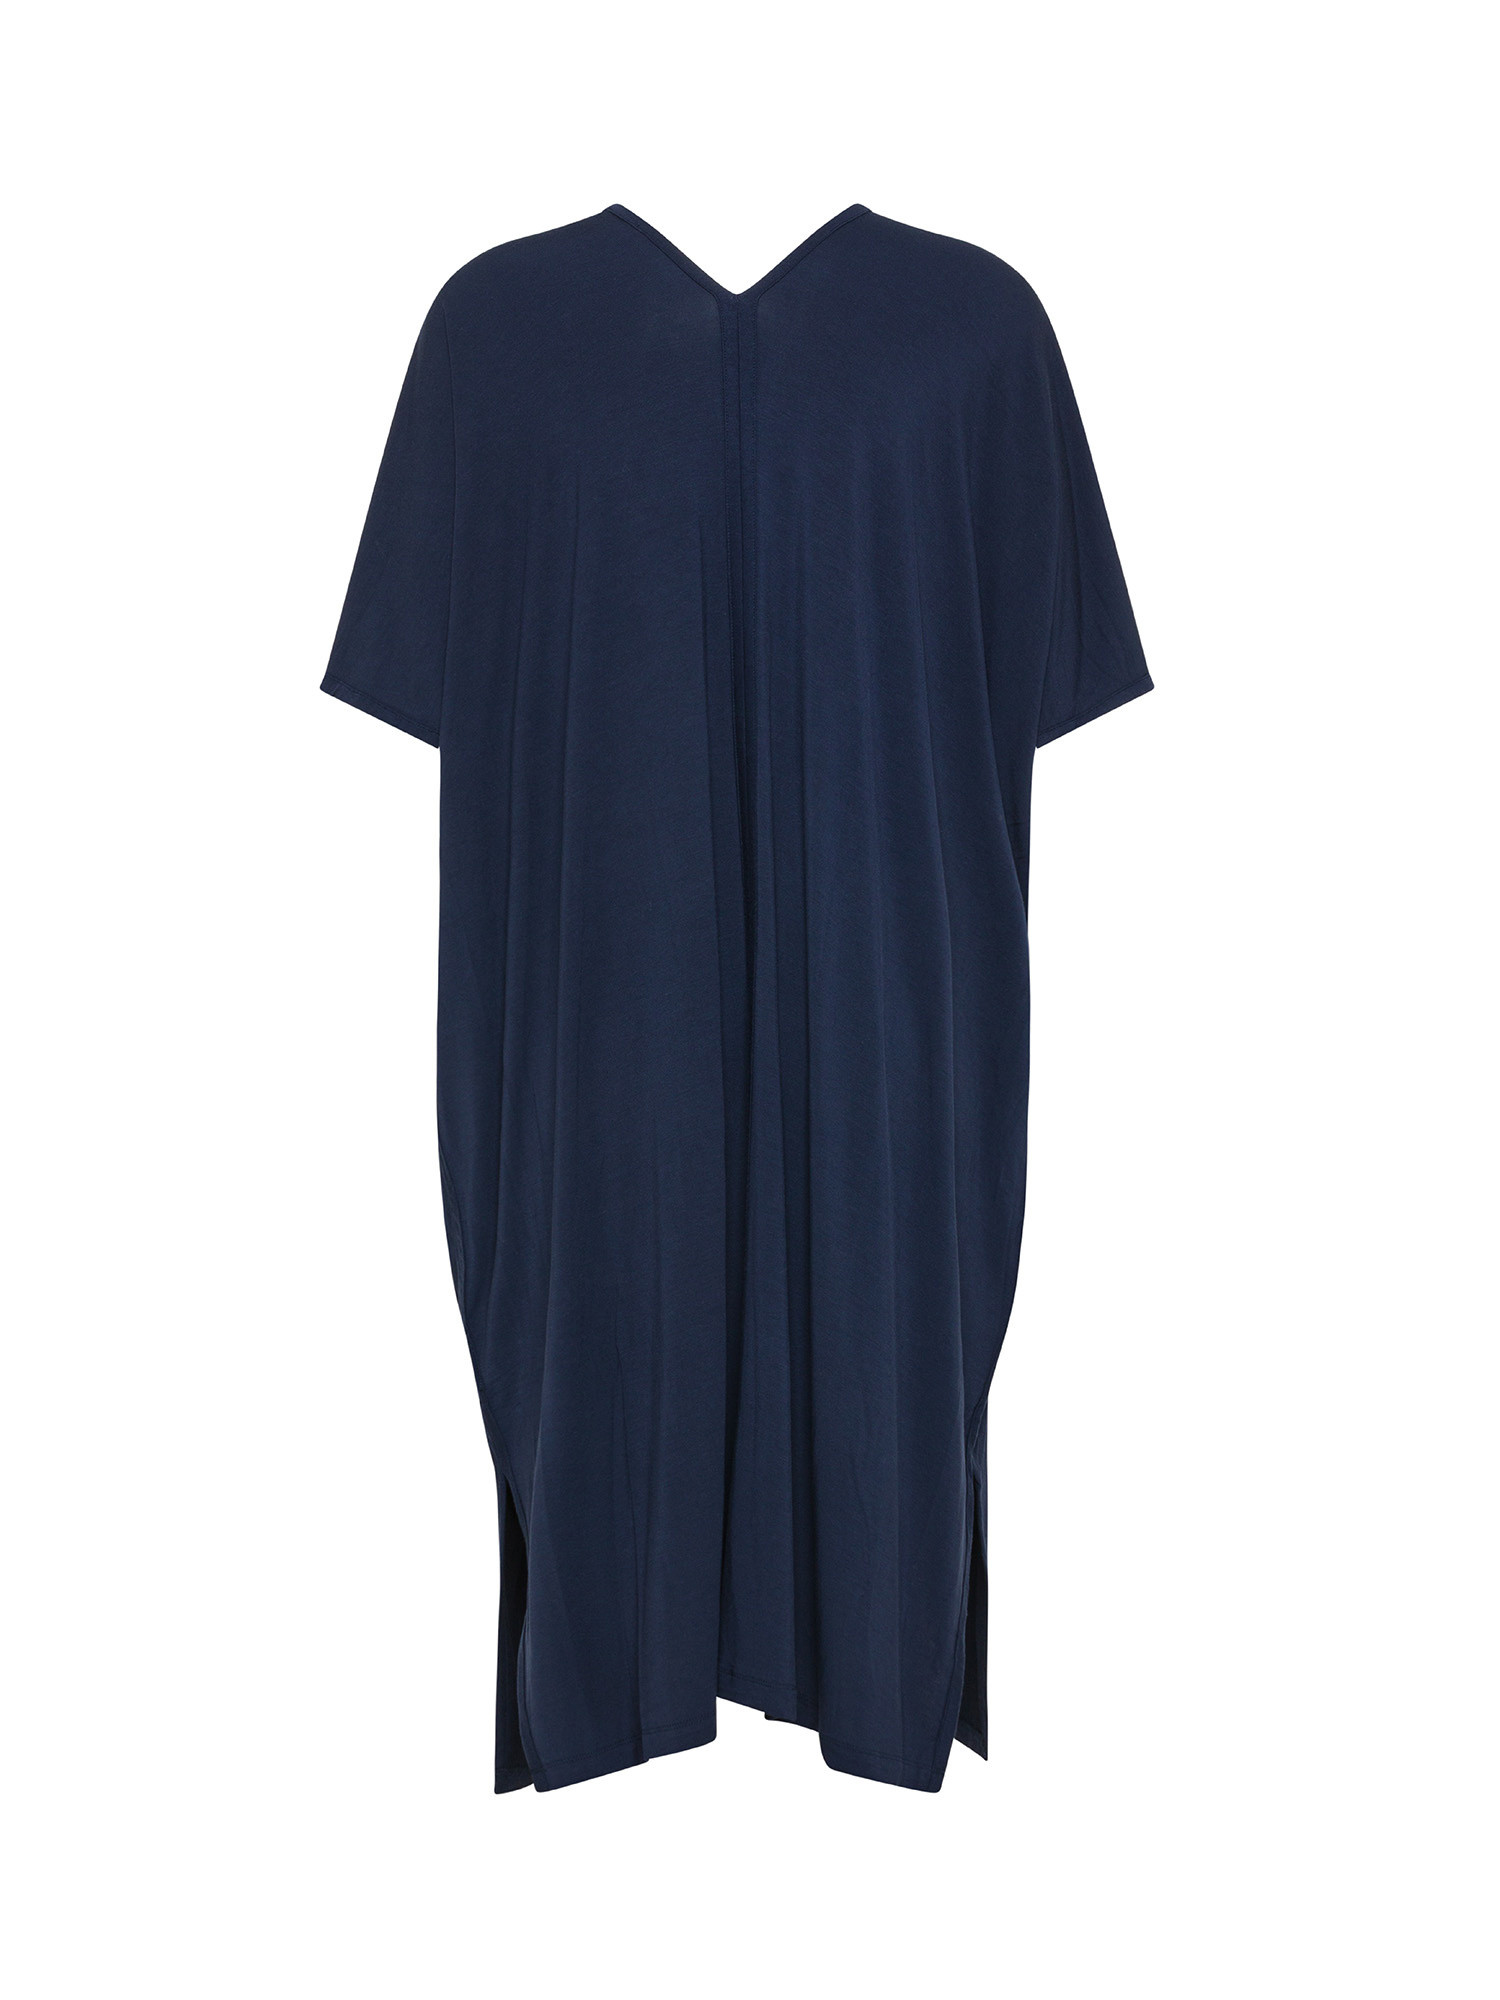 Vestito in viscosa di bamboo., Blue Navy, large image number 1